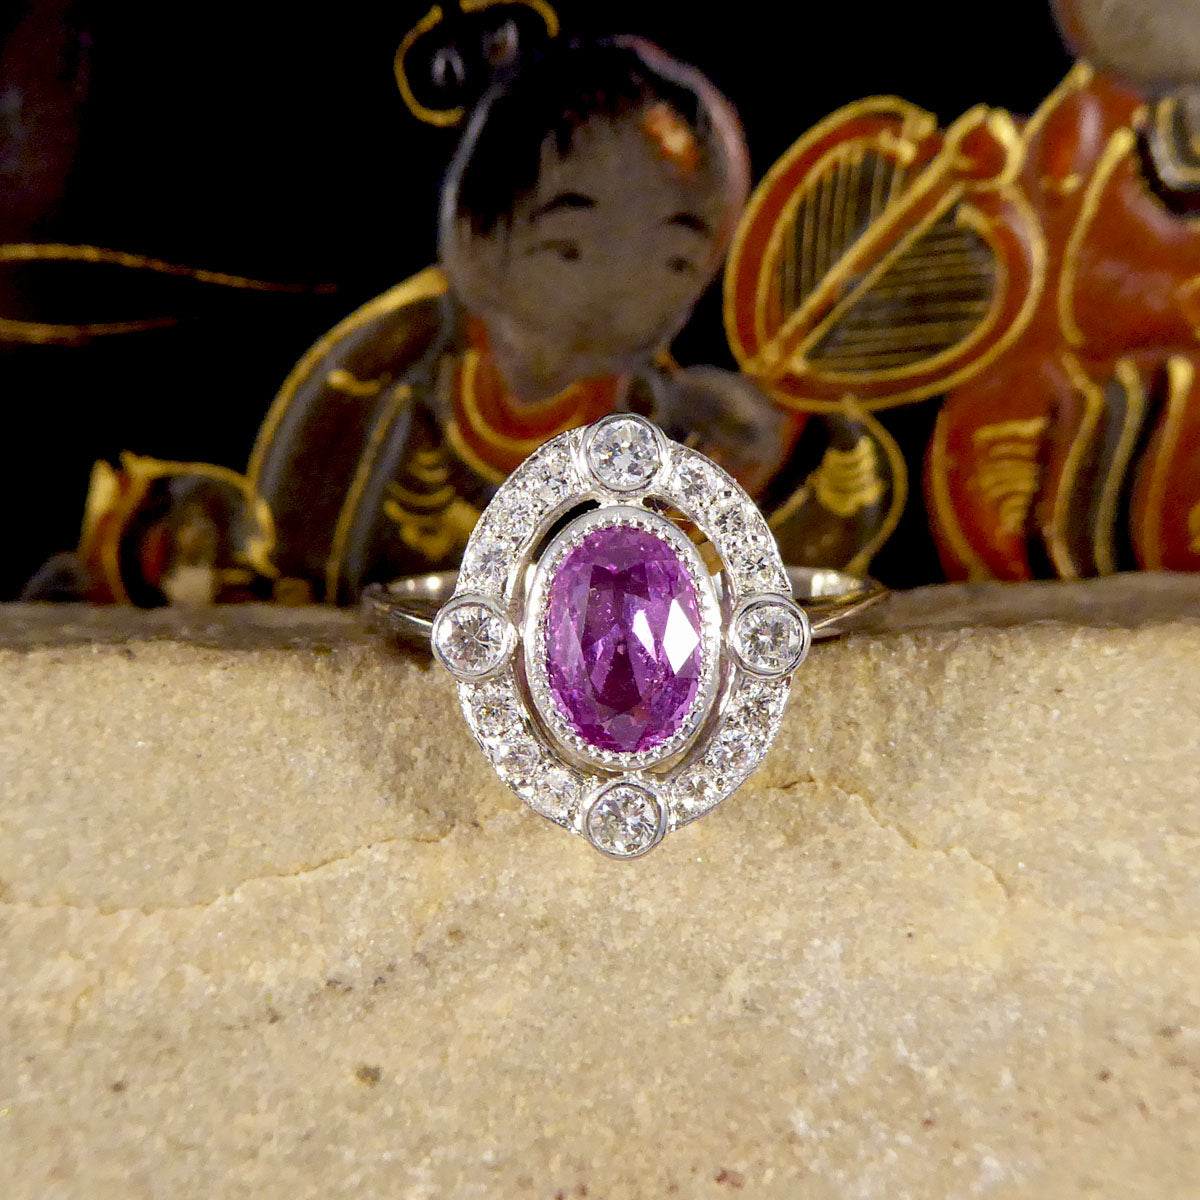 Contemporary 1.05ct Pink Sapphire and Diamond Halo Ring Mounted in Platinum